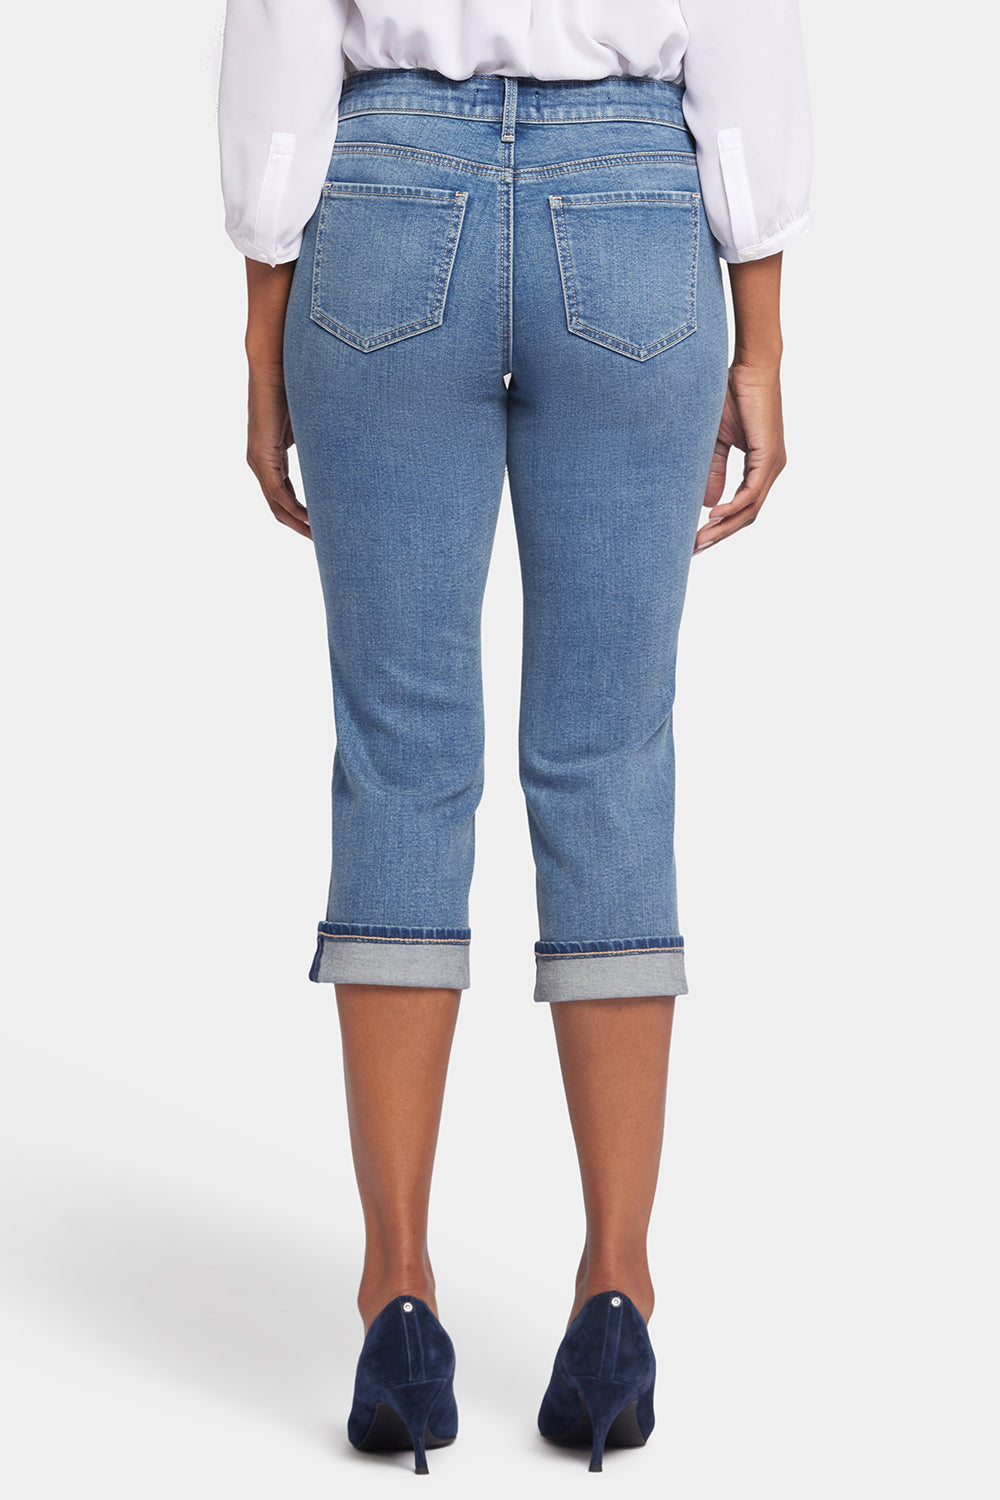 NYDJ Marilyn Straight Crop Jeans With Cuffs - Upbeat